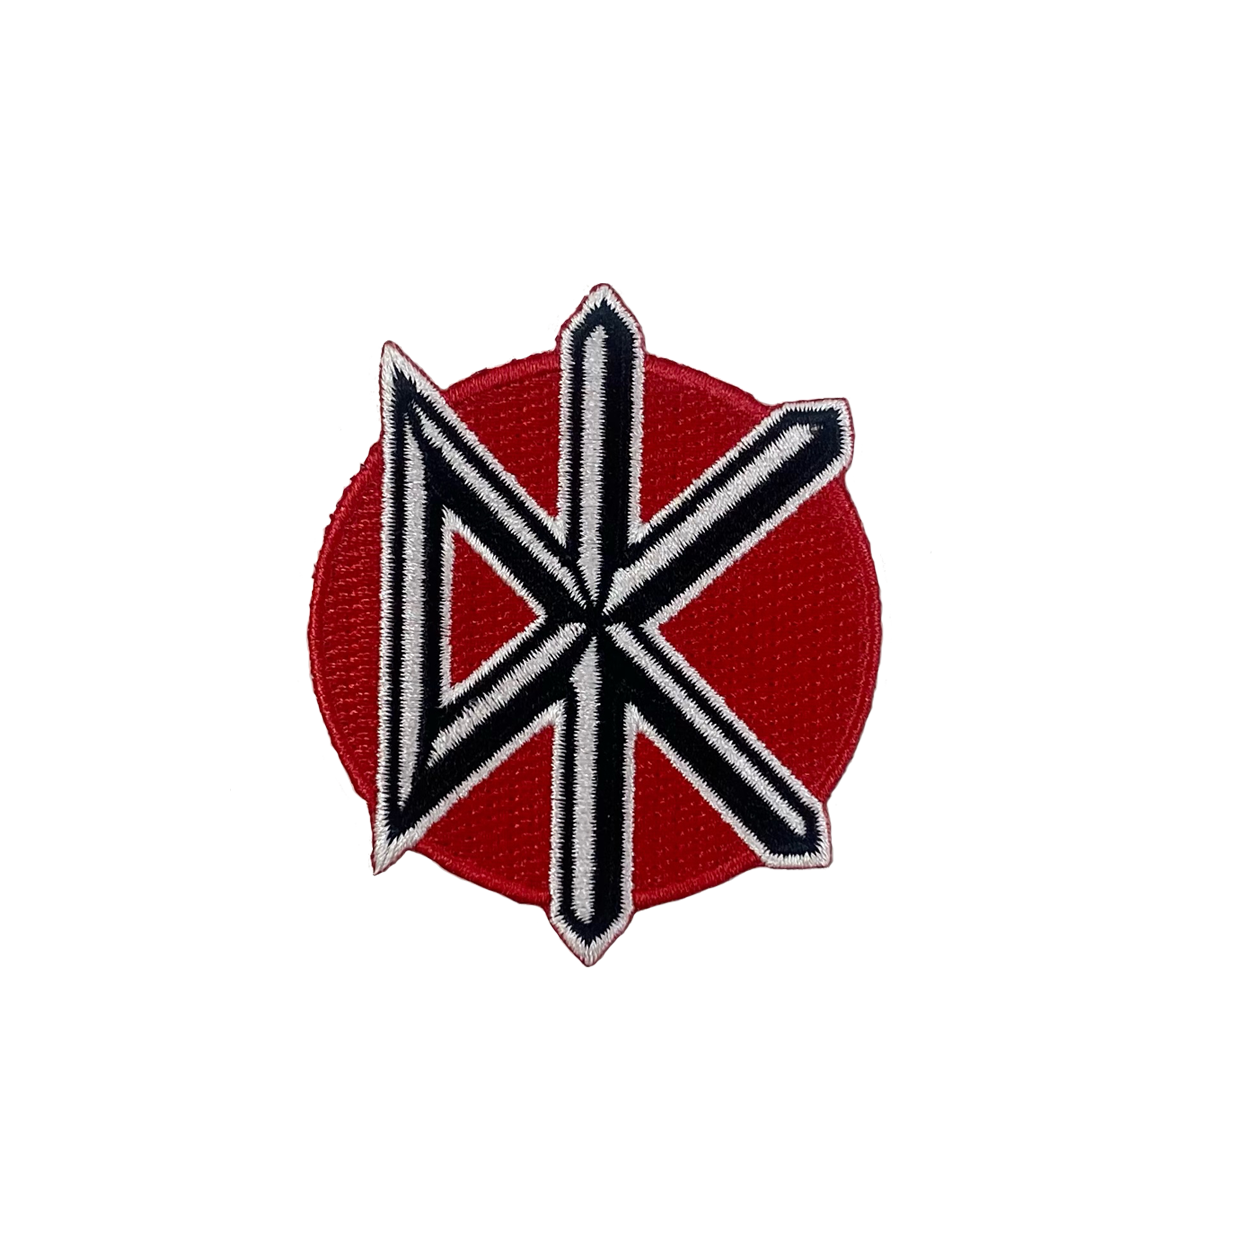 DEAD KENNEDY'S ICON EMBROIDERED PATCH